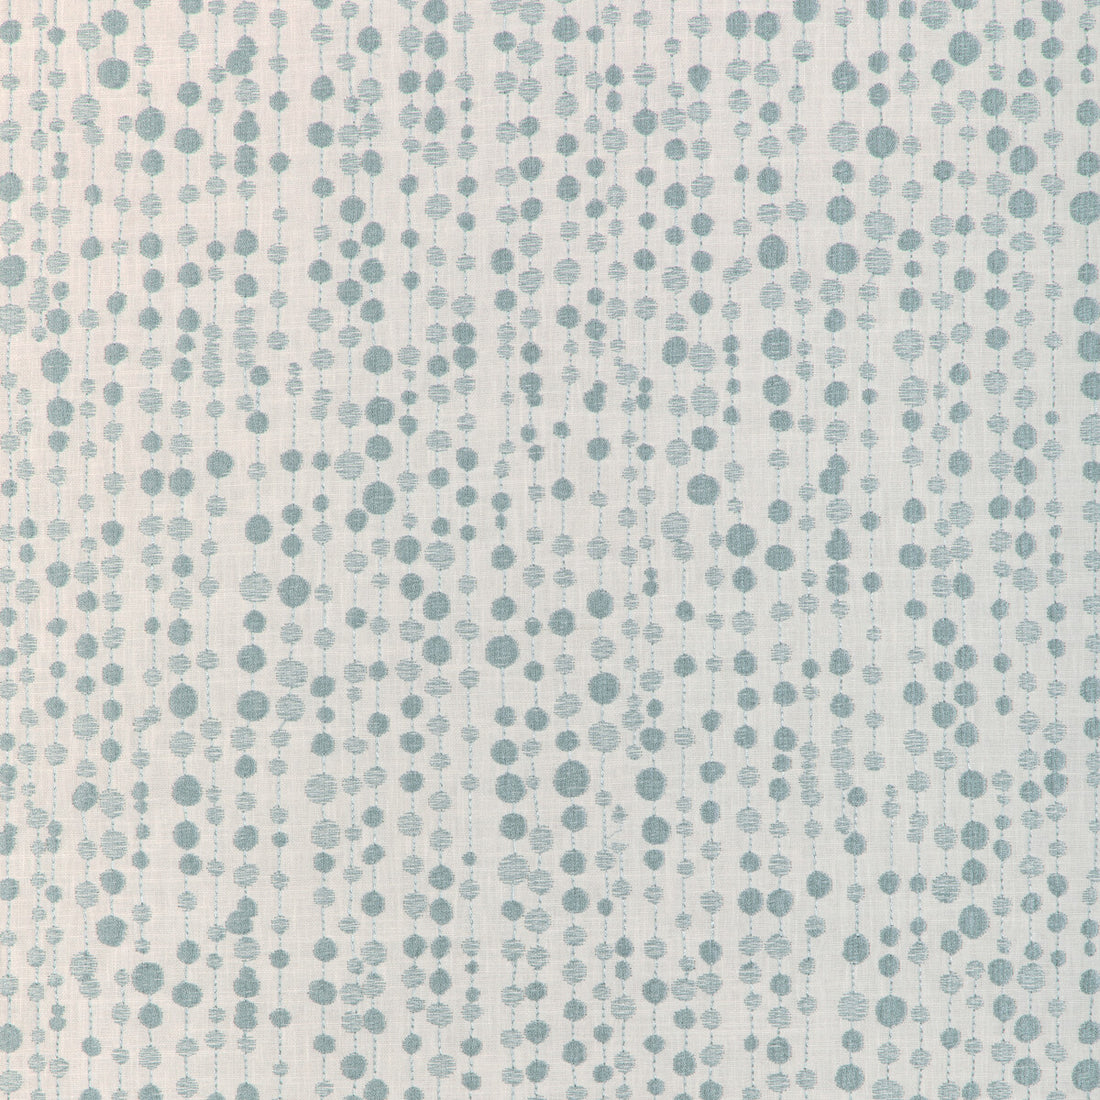 String Dot fabric in spa color - pattern 36953.15.0 - by Kravet Basics in the Mid-Century Modern collection